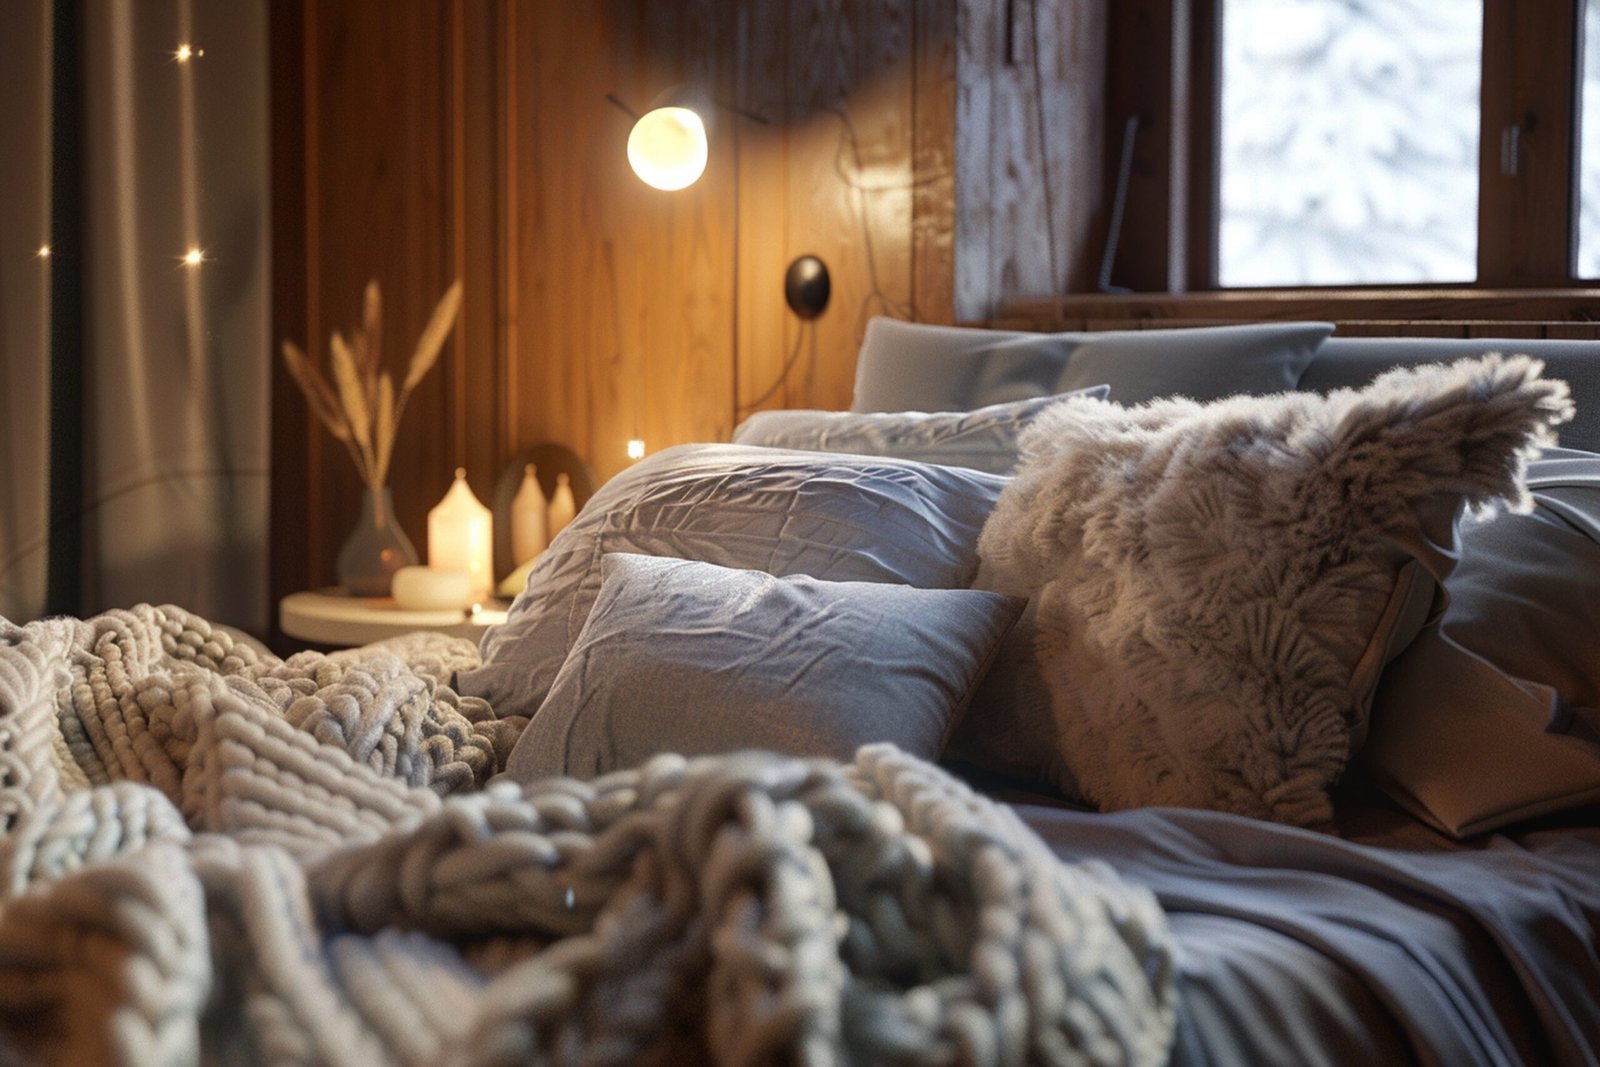 Cozy bed with soft fluffy pillows.